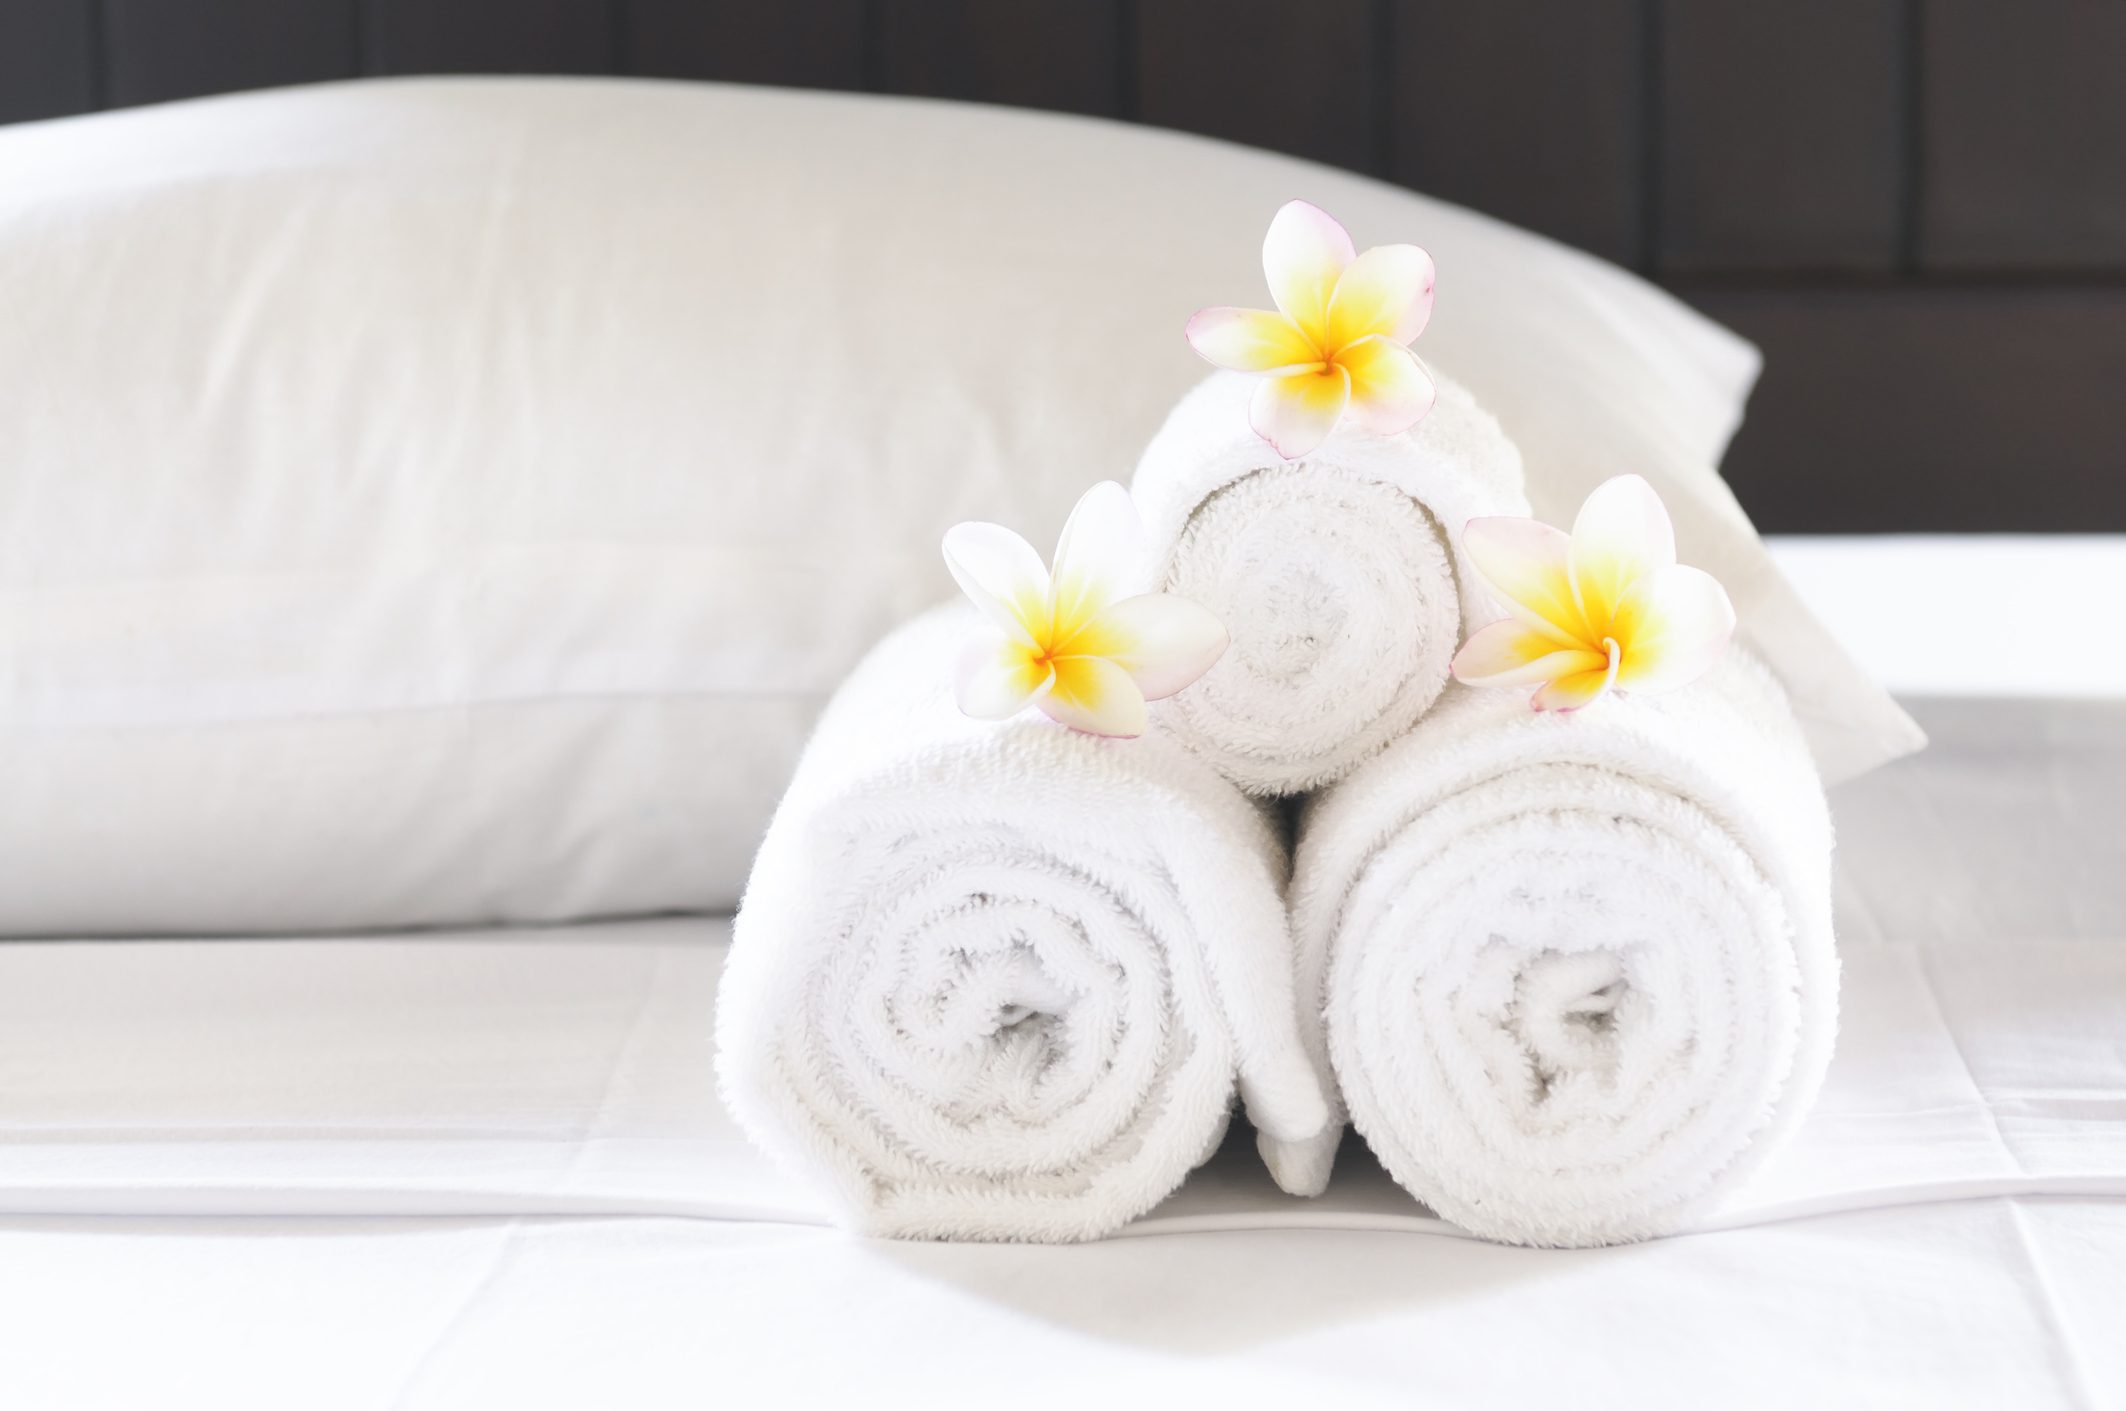 Three white towels with flowers placed on each sitting on top of freshly done white sheets and a pillow.